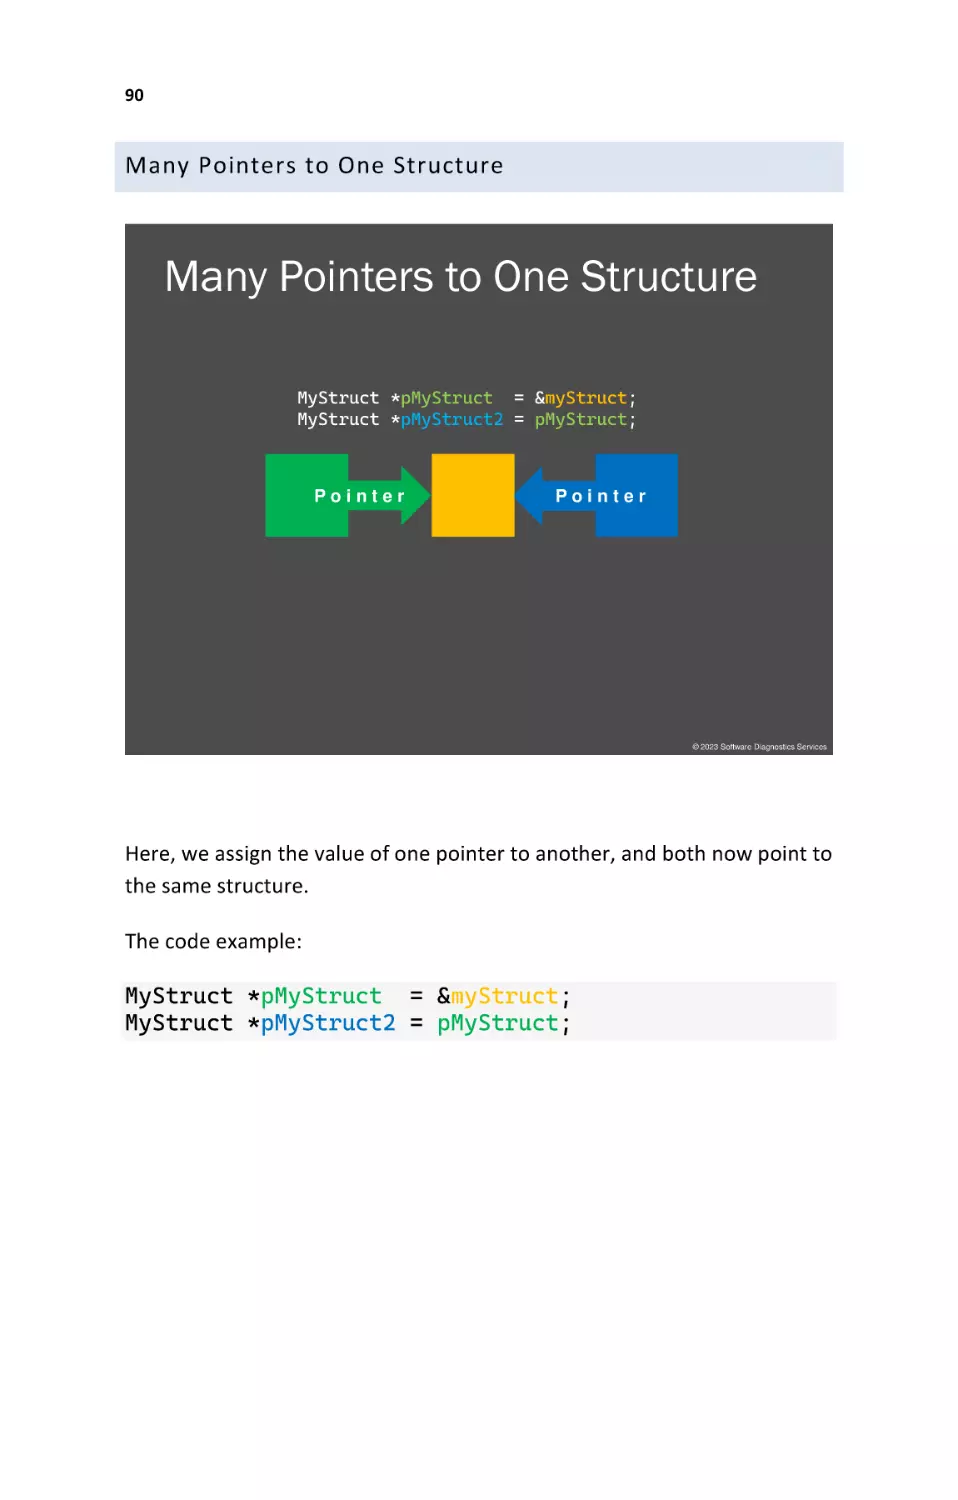 Many Pointers to One Structure